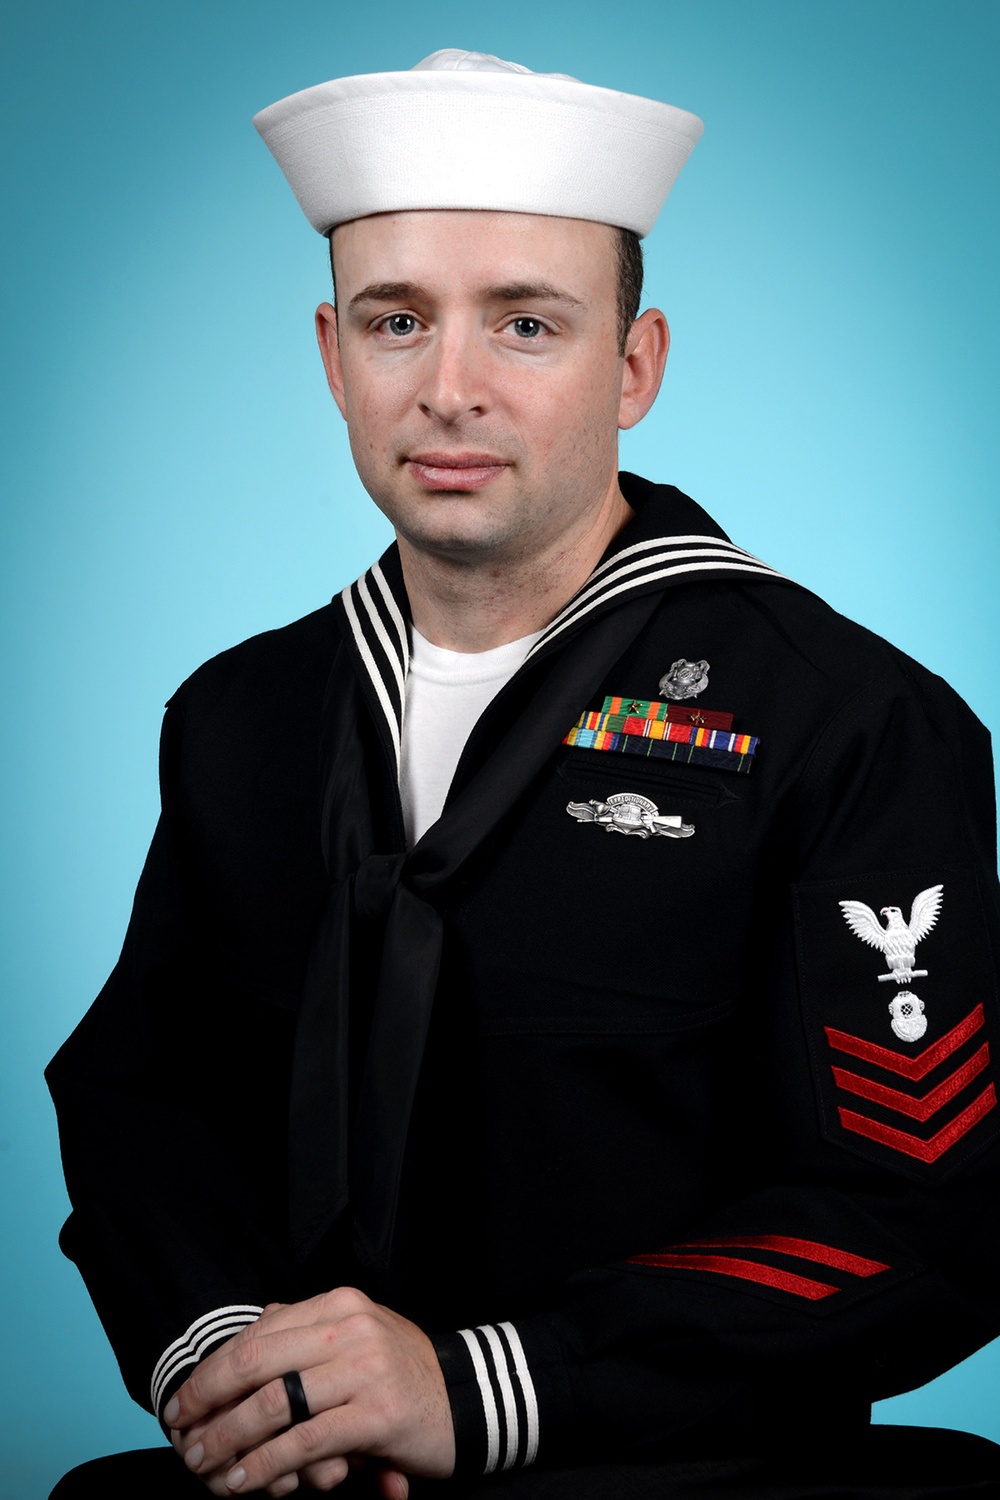 NIWC Pacific ND1 Aaron Gruber Named U.S. Navy Shore Sailor of the Year